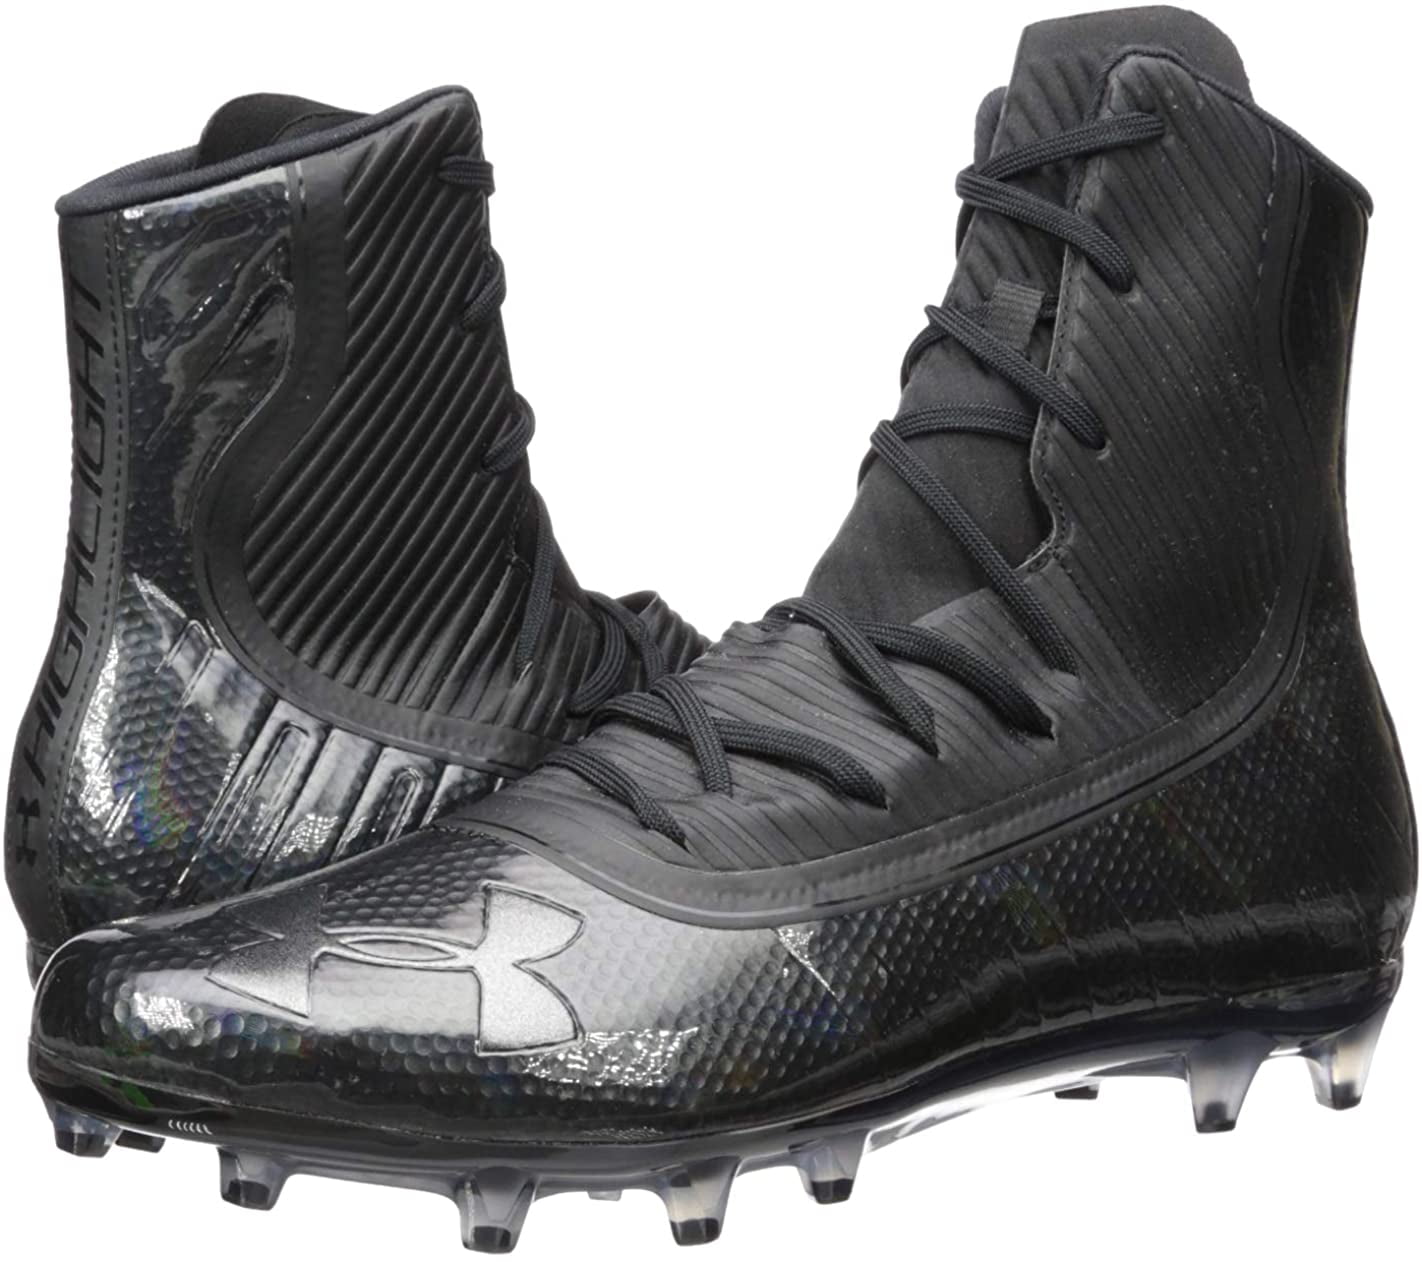 Under Armour Men's Ua Highlight Mc – Limited Edition Football Cleats for  Men